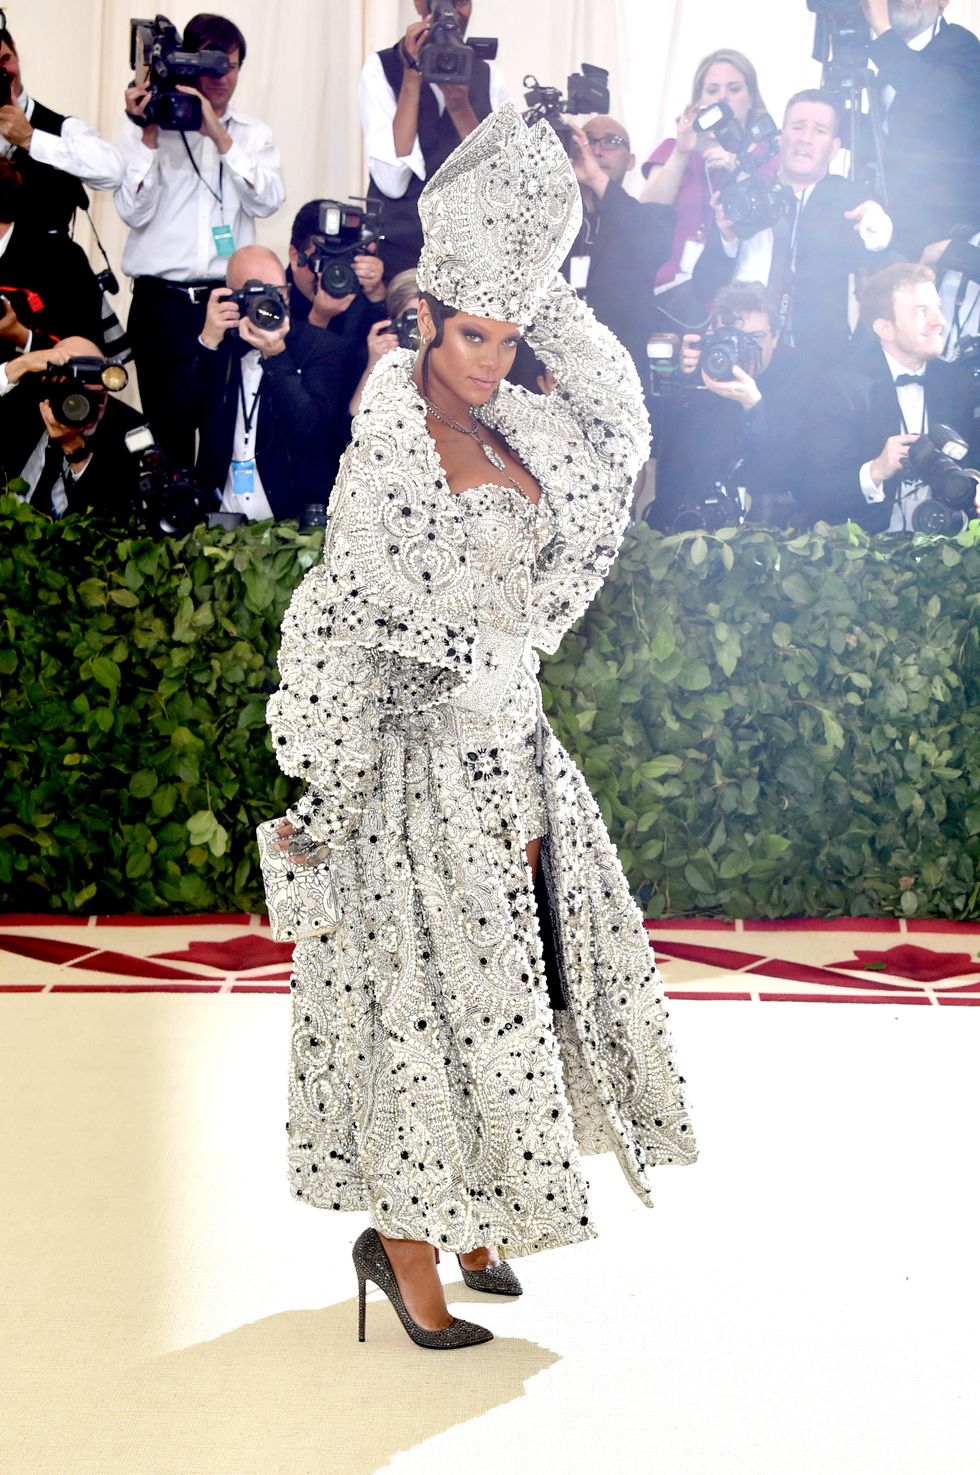 Best and Worst Dressed List From Met Gala 2018 - Met Ball Red Carpet ...